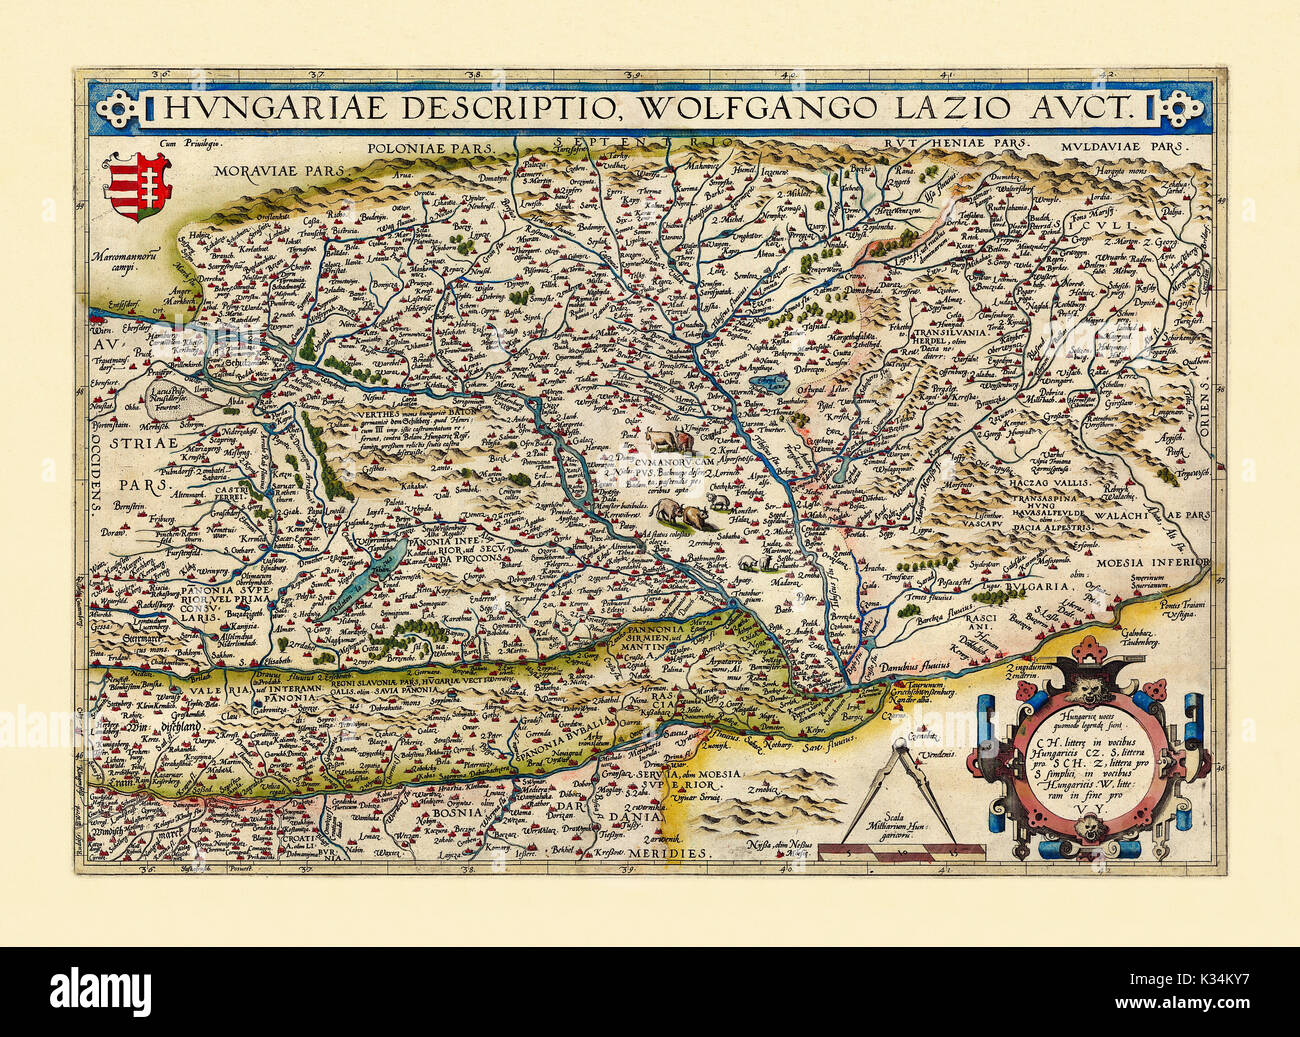 Old map of Hungary. Excellent state of preservation realized in ancient style. All the graphic composition is inside a frame. By Ortelius, Theatrum Orbis Terrarum, Antwerp, 1570 Stock Photo